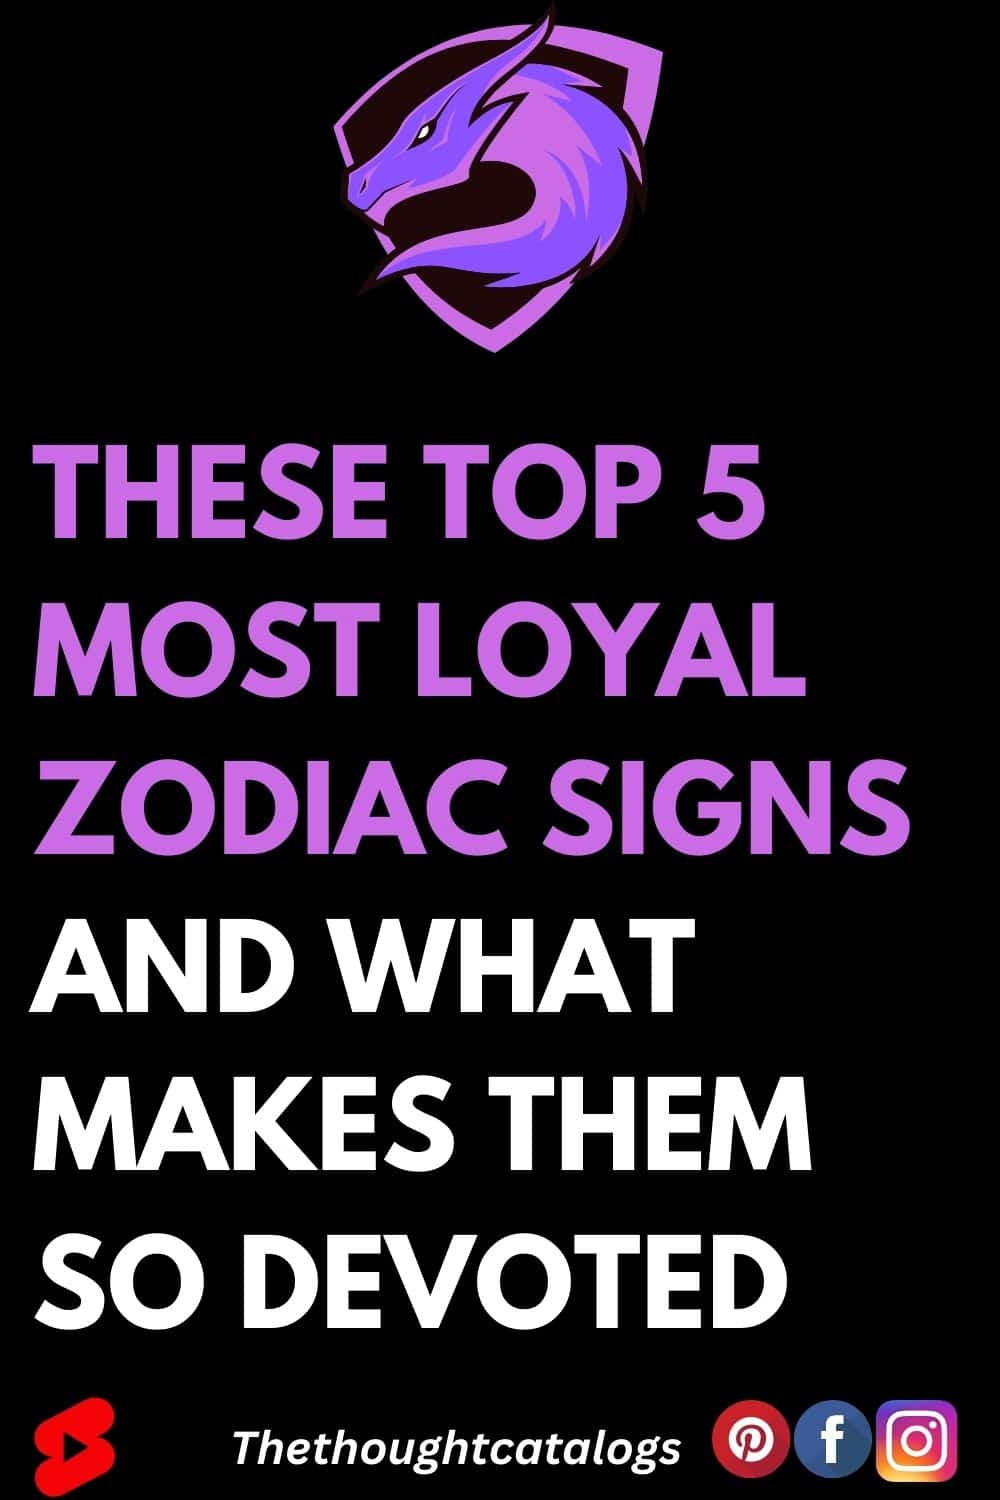 These Top 5 Most Loyal Zodiac Signs and What Makes Them So Devoted